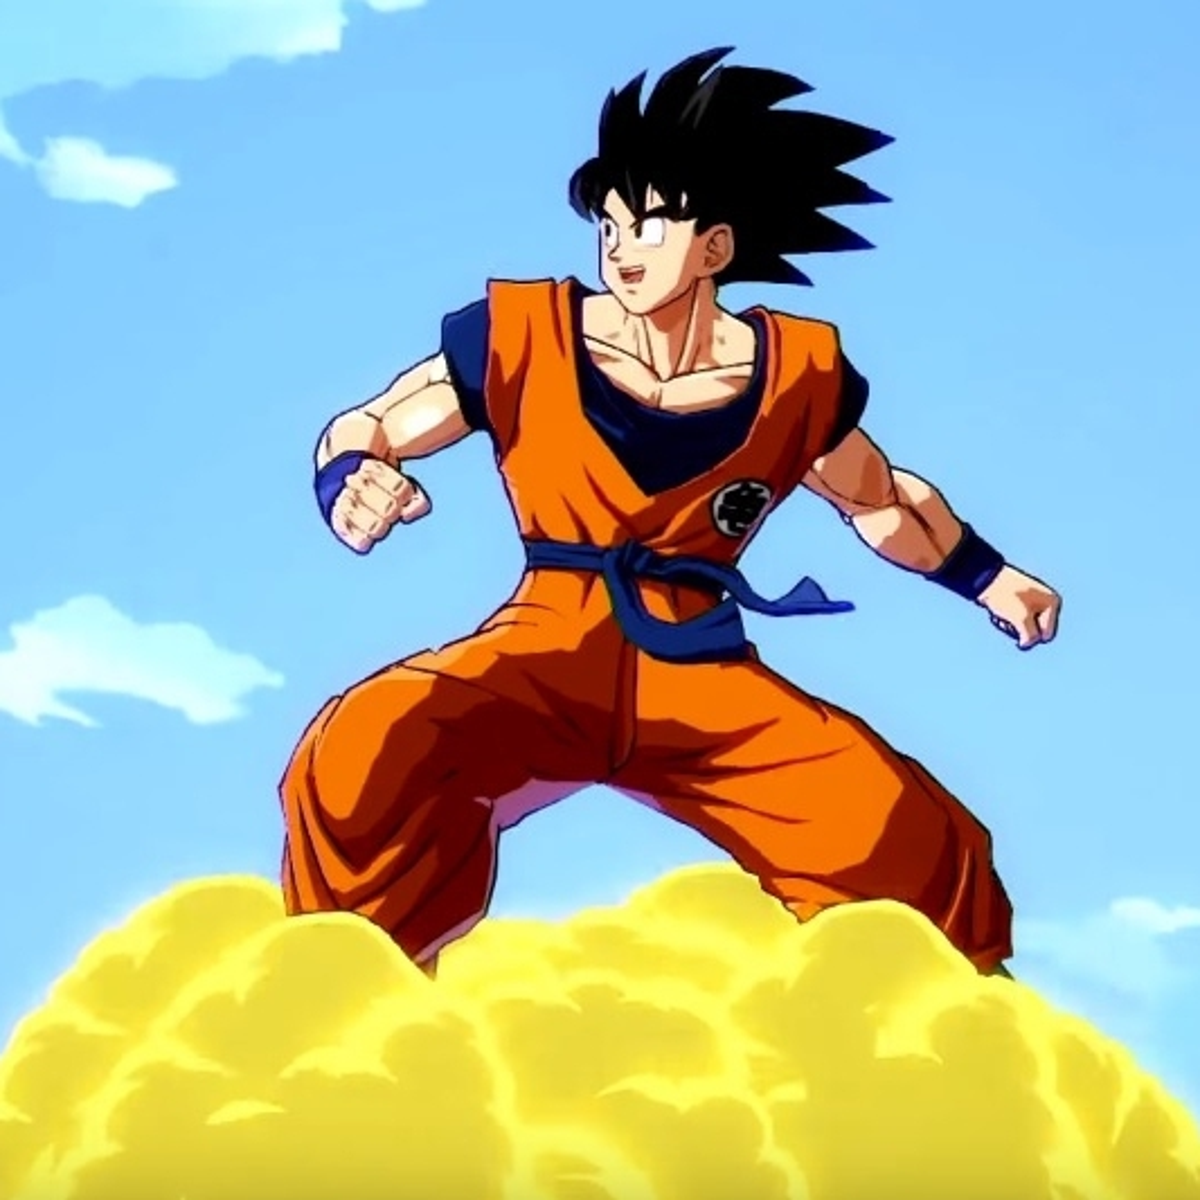 Here's our first look at Base Goku gameplay in Dragon Ball FighterZ